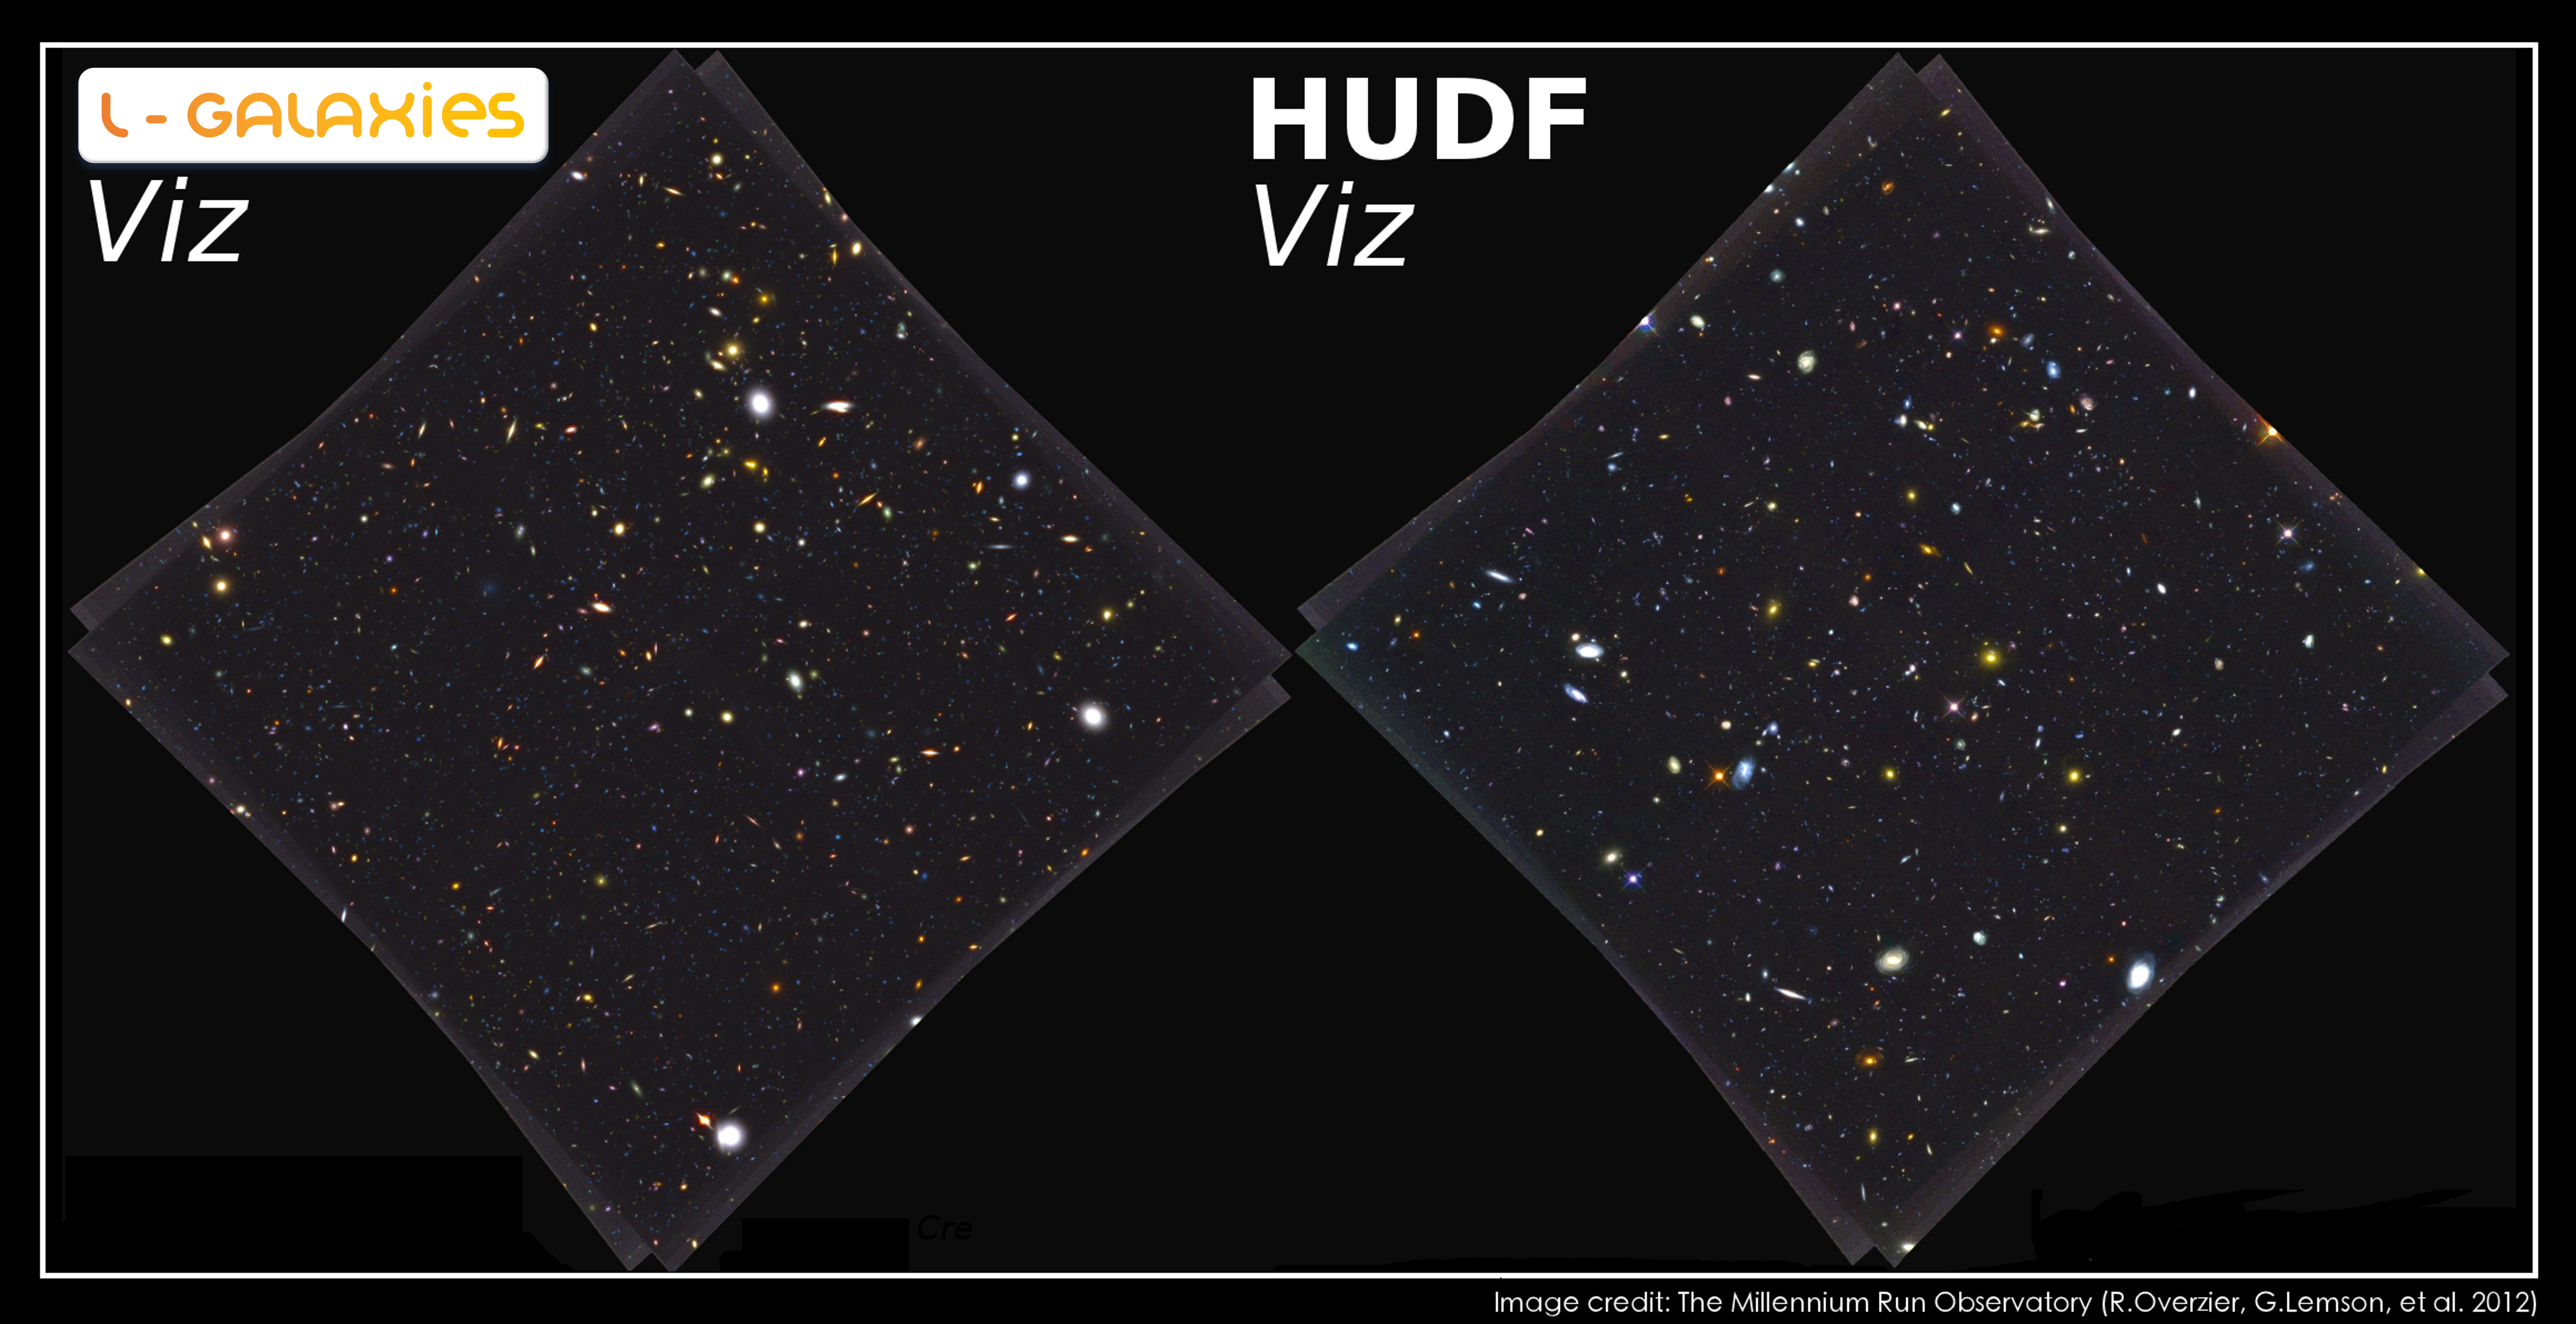 A real HST image of the Hubble Ultra Deep Field (HUDF) in the V,  i, and z filters (right) alongside a synthetic HST Viz image from the L-Galaxies simulation (left). Credit R. Overzier (MRObs).